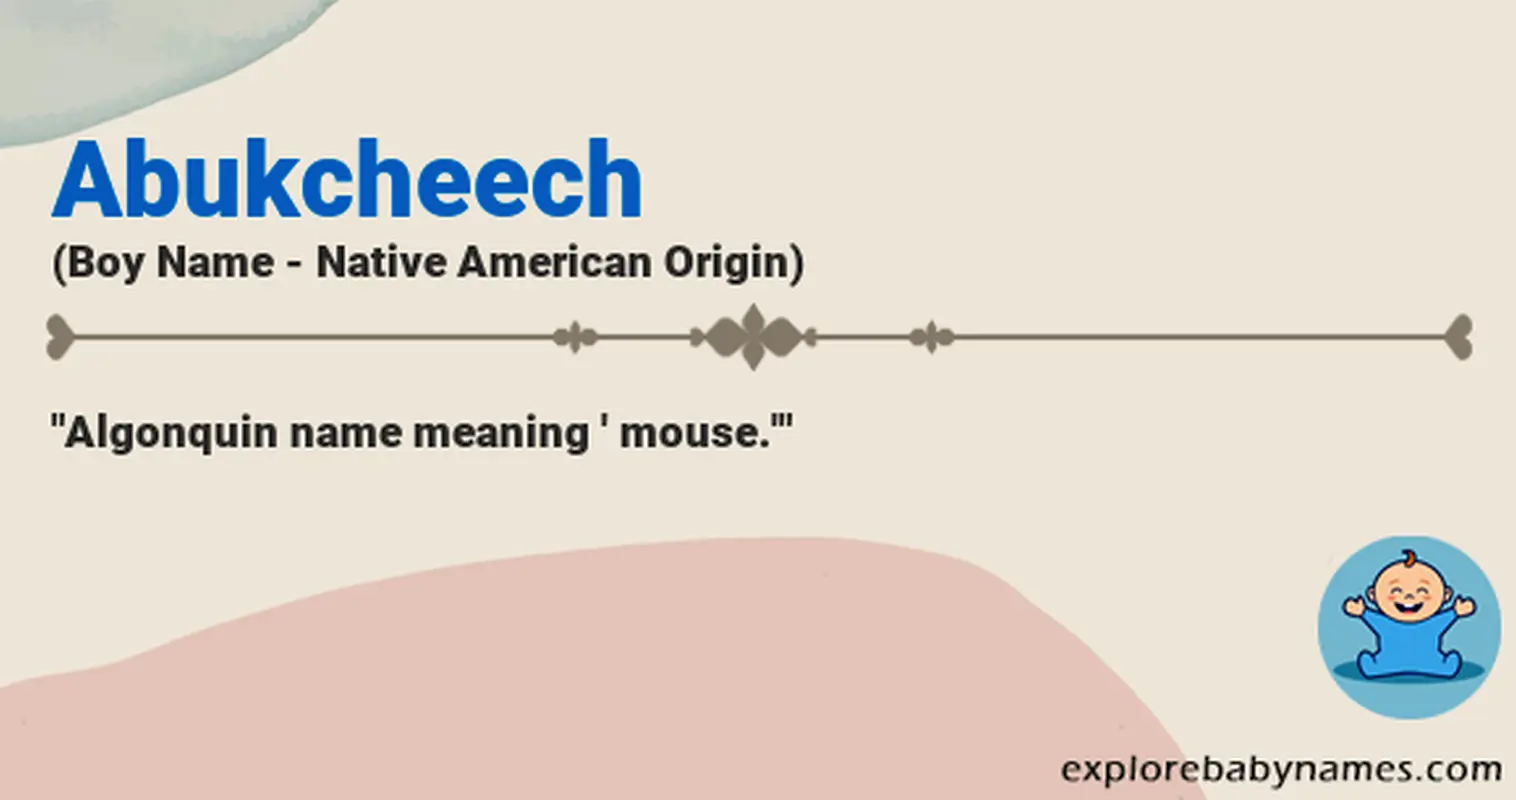 Meaning of Abukcheech